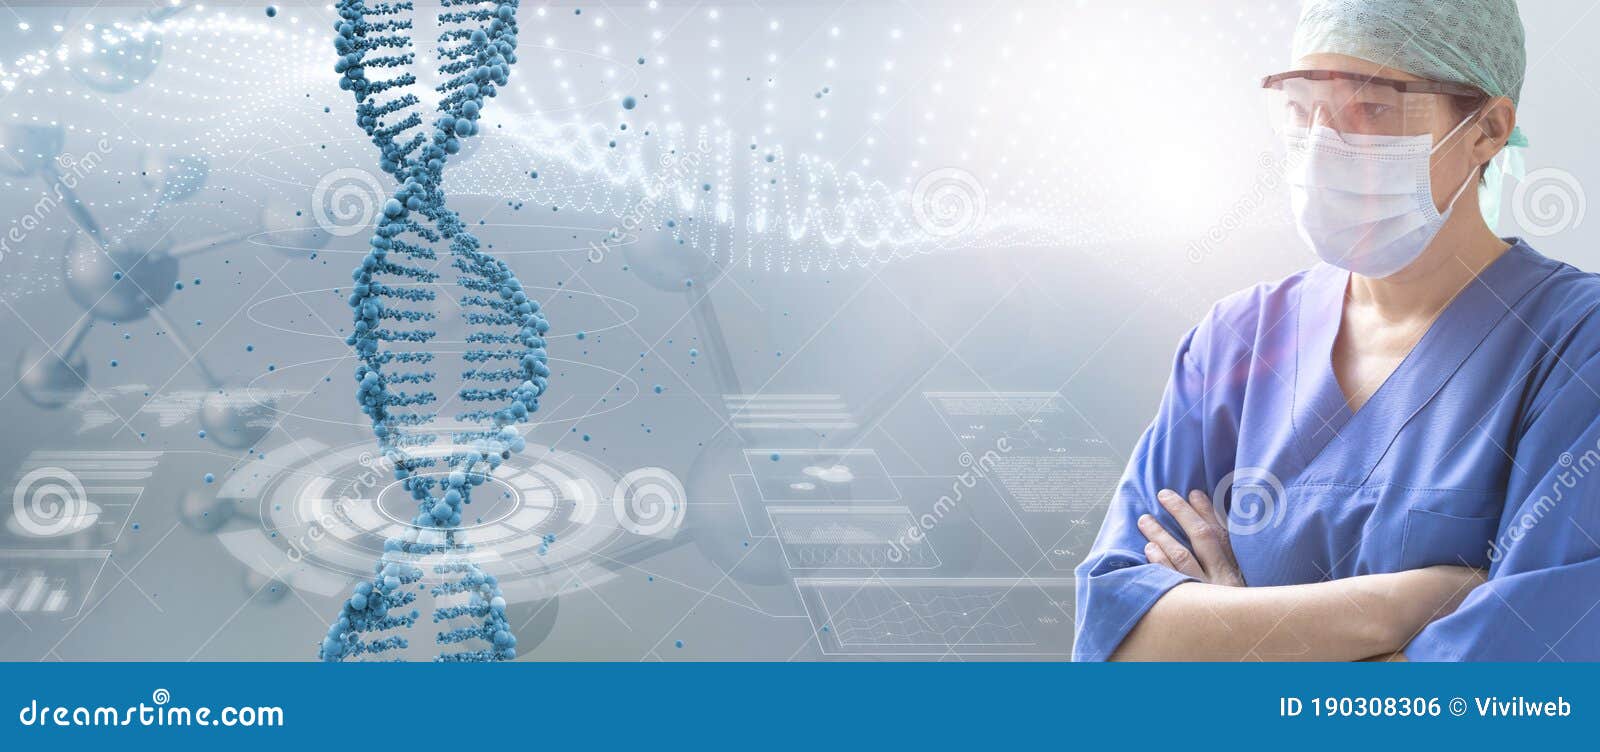 serious female doctor examining a dna helix hologram, genetic disease care concept